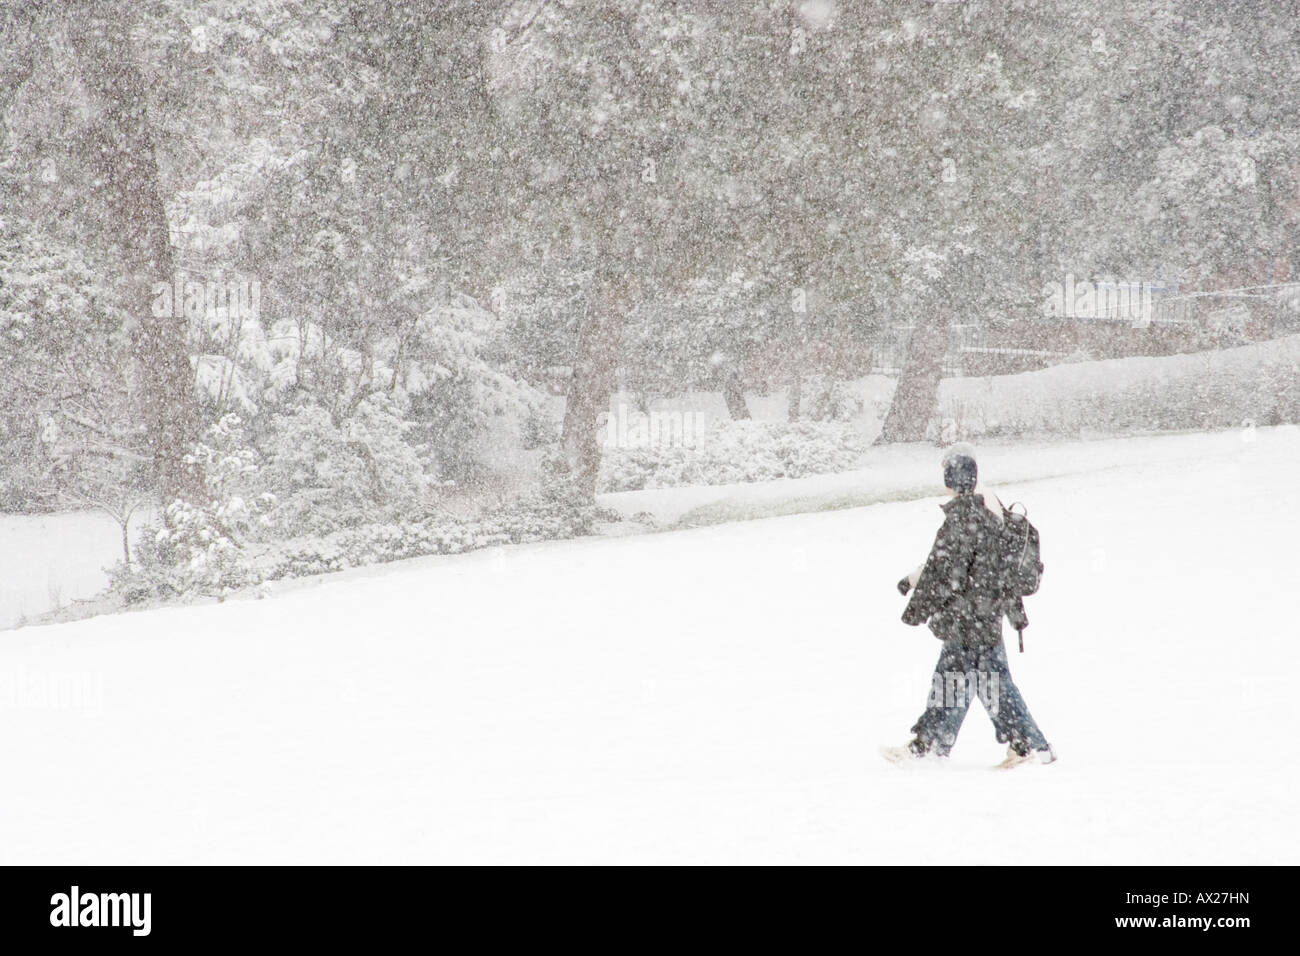 One Person walking in heavy snow fall, almost blizzard conditions Stock Photo